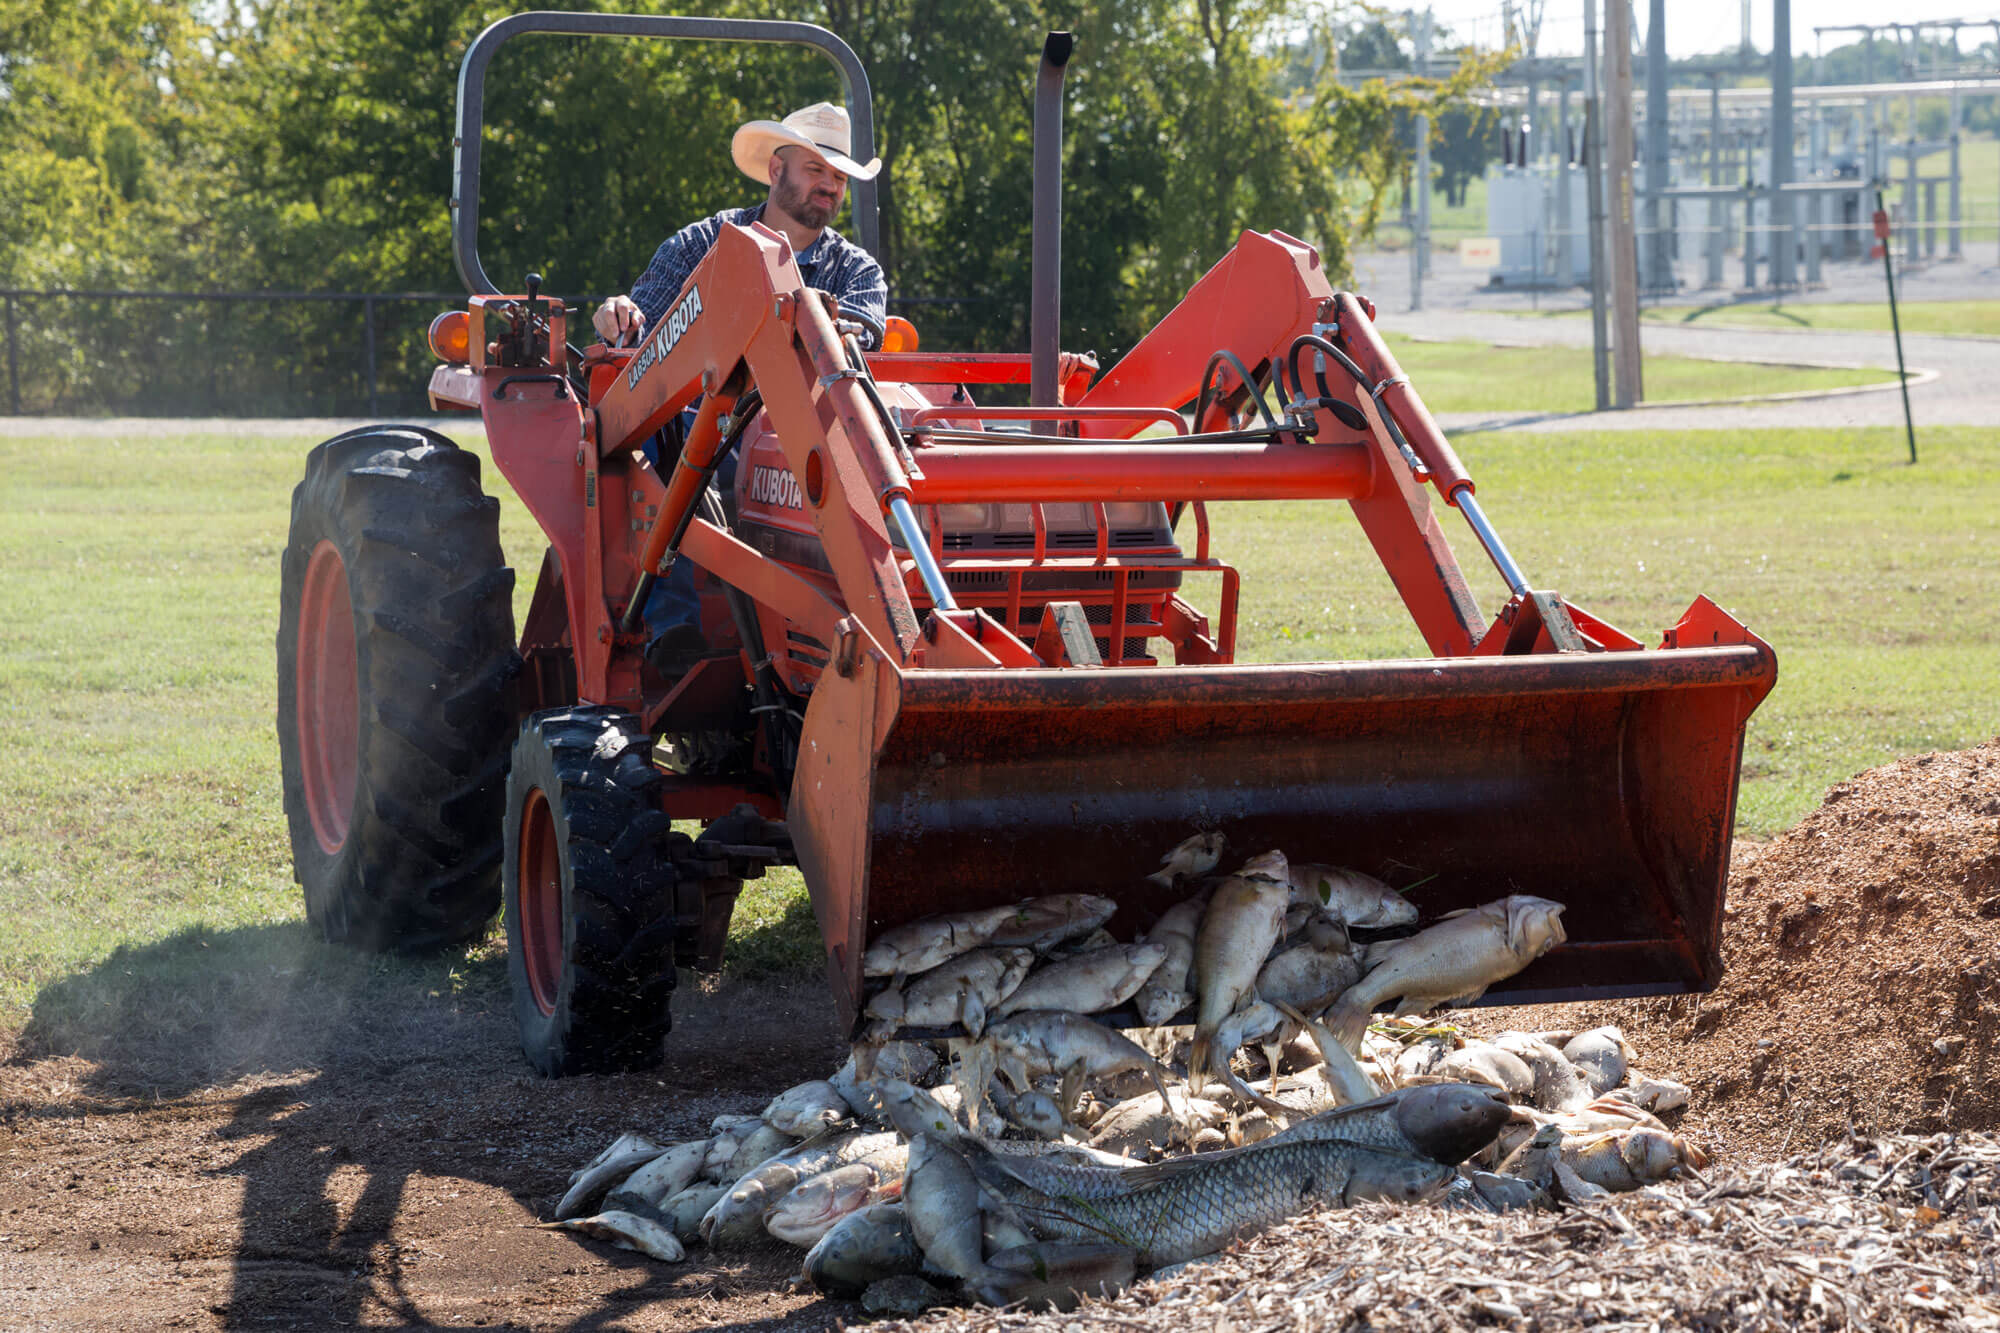 Tractor scooping up dead fish gathered from pond